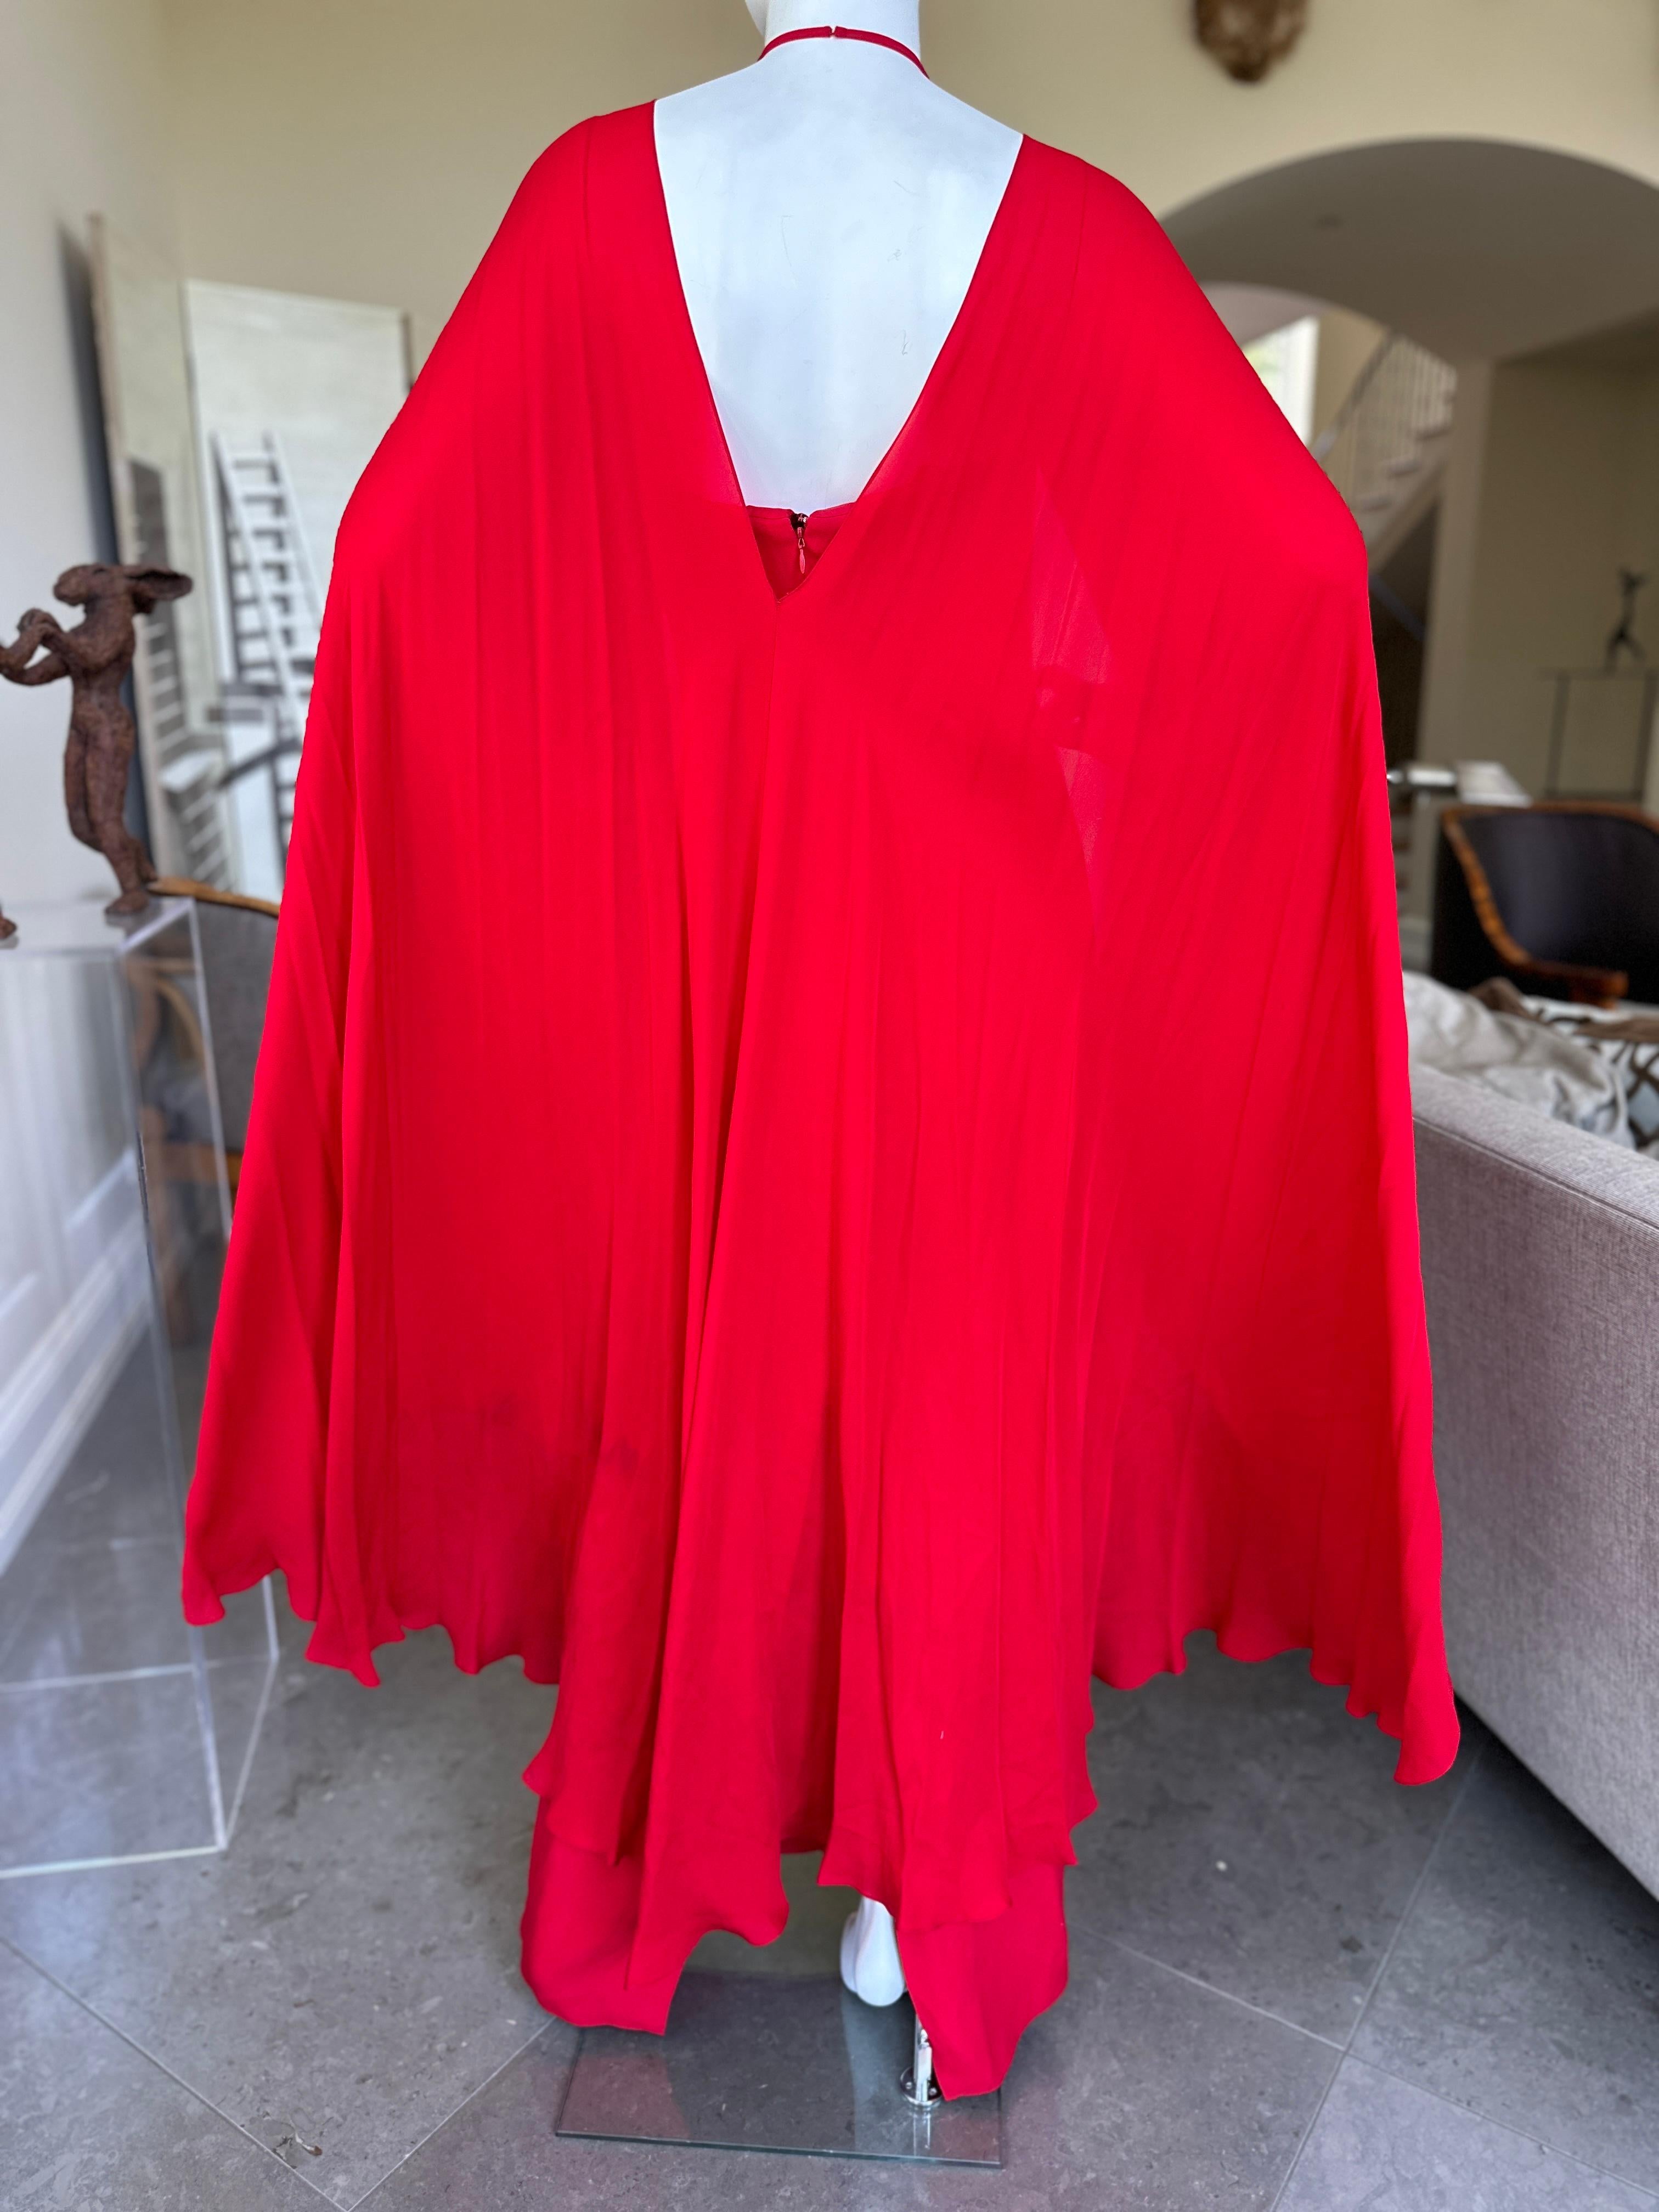 Bill Blass Vintage 1980's Red Silk Evening Dress with Attached Cape In Excellent Condition For Sale In Cloverdale, CA